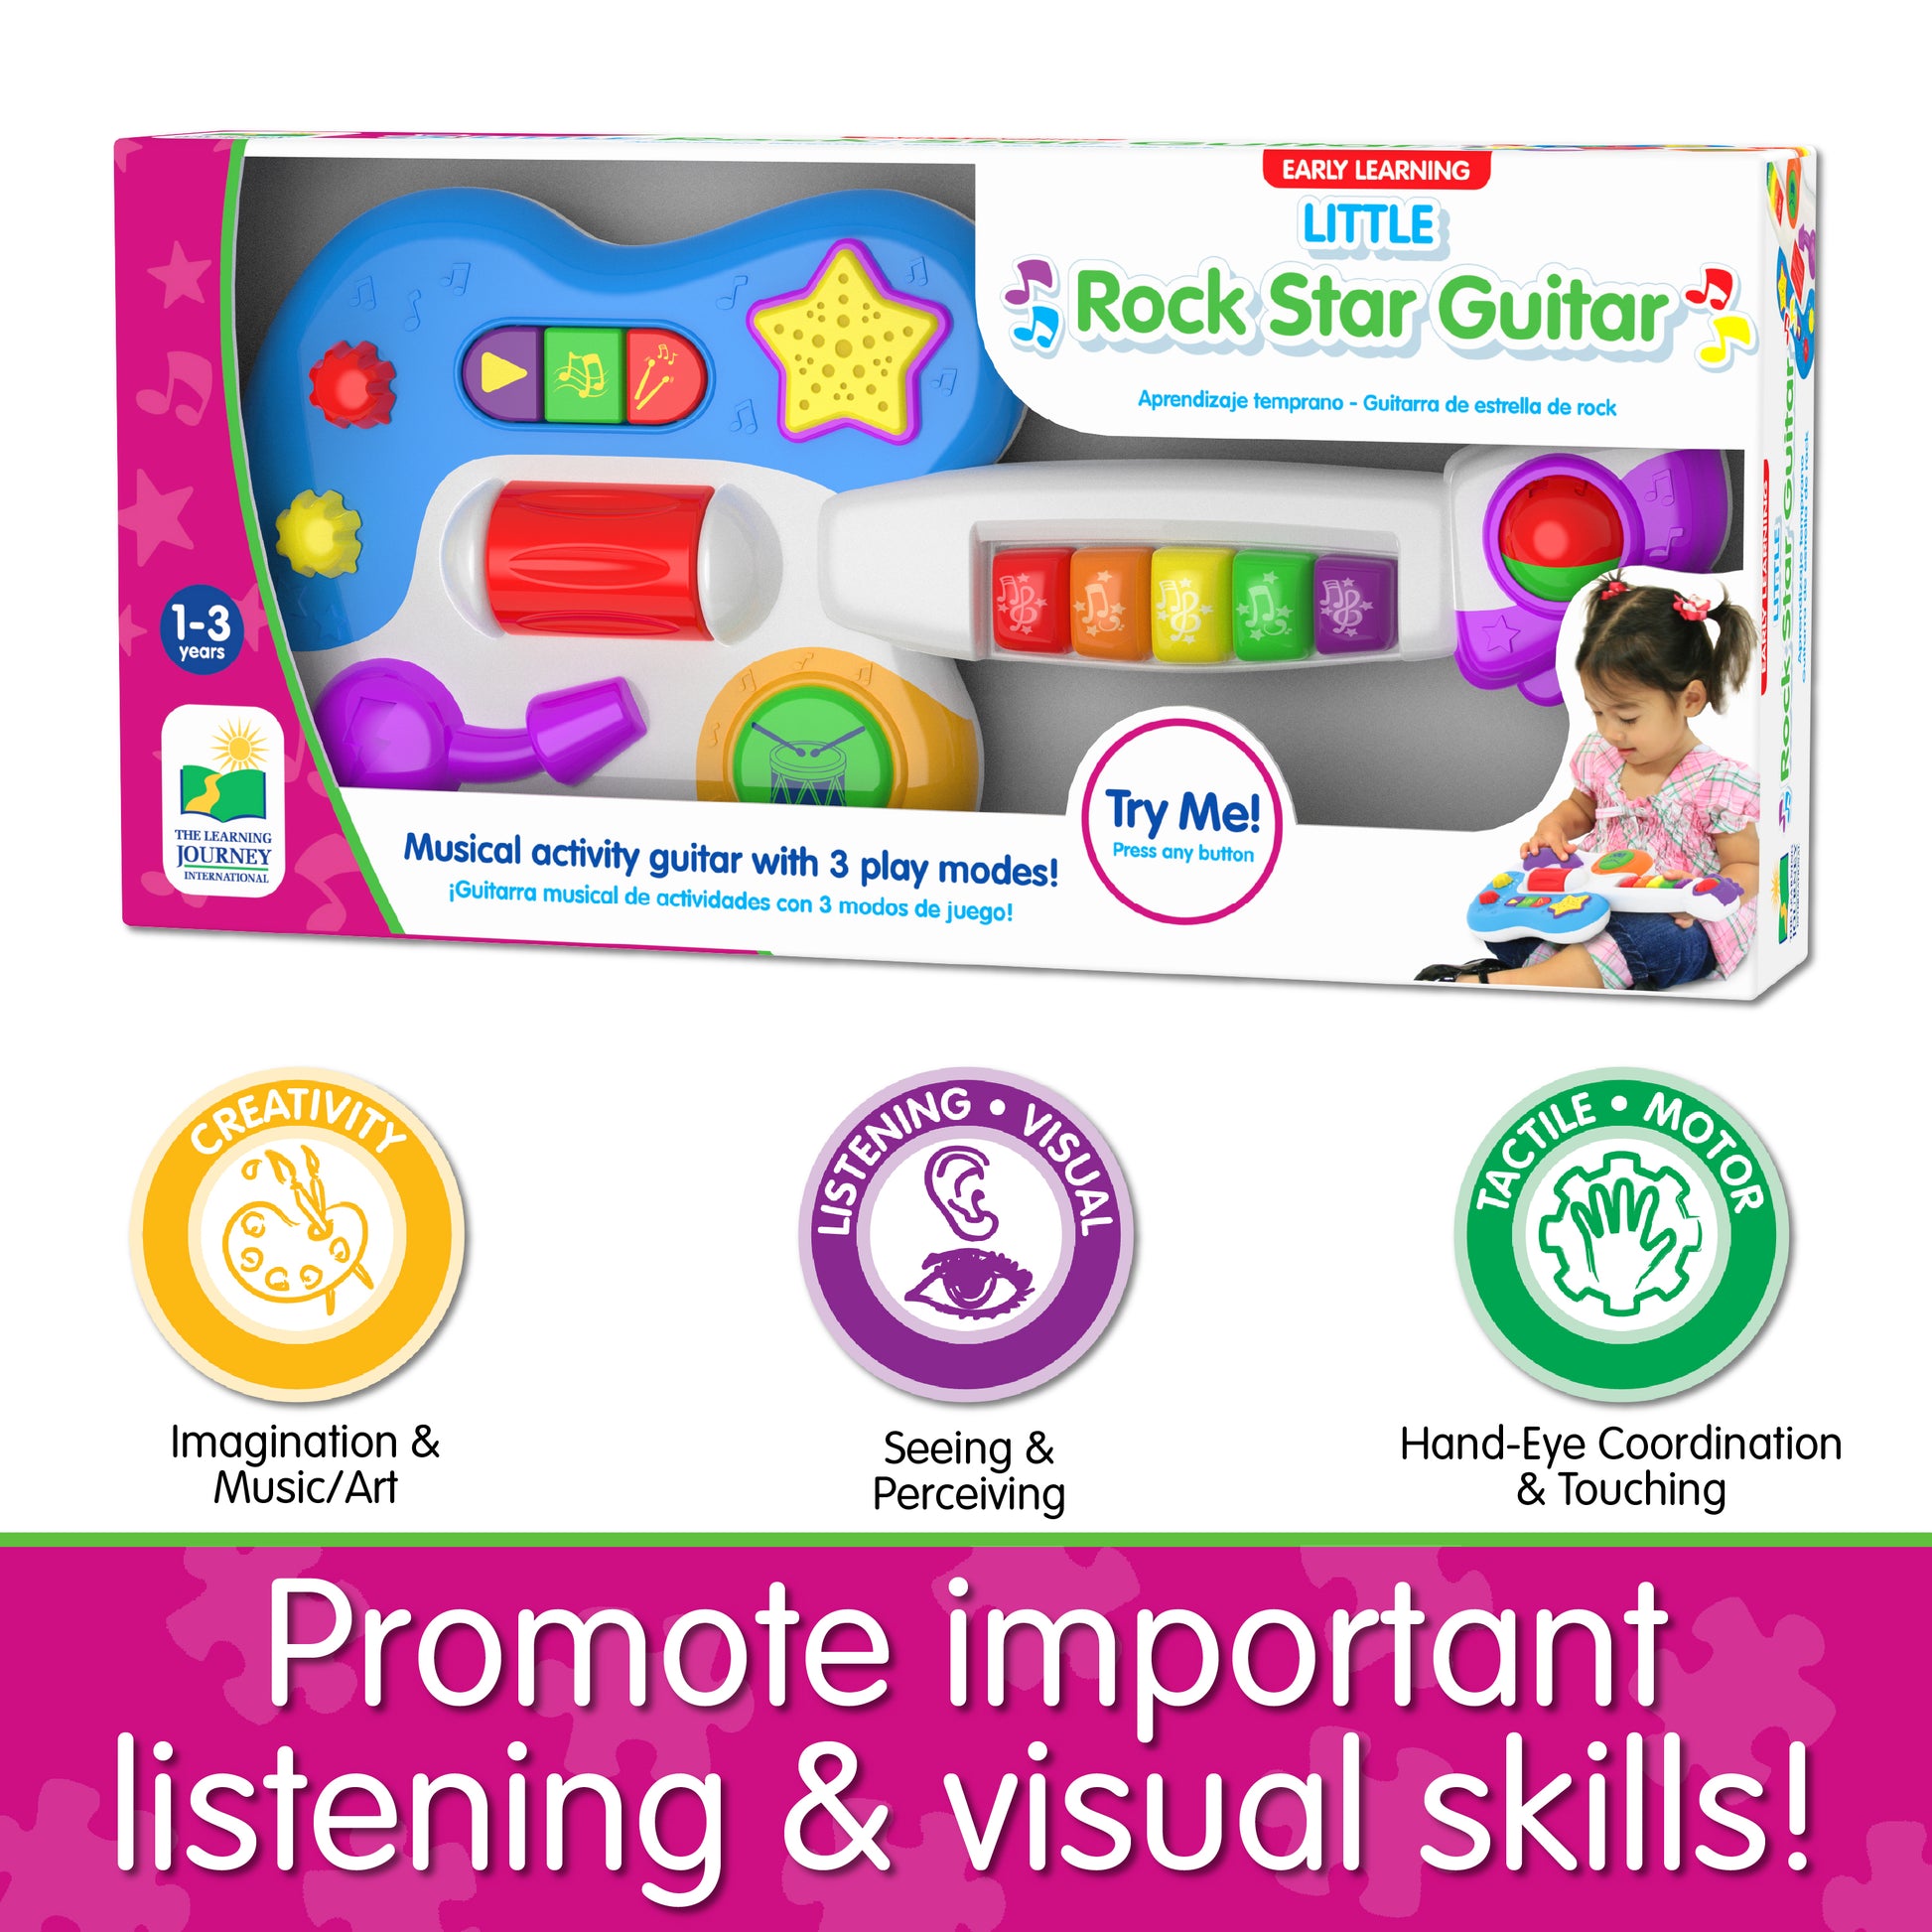 Infographic with Little Rock Star Guitar's educational benefits that says, "Promote important listening and visual skills!"